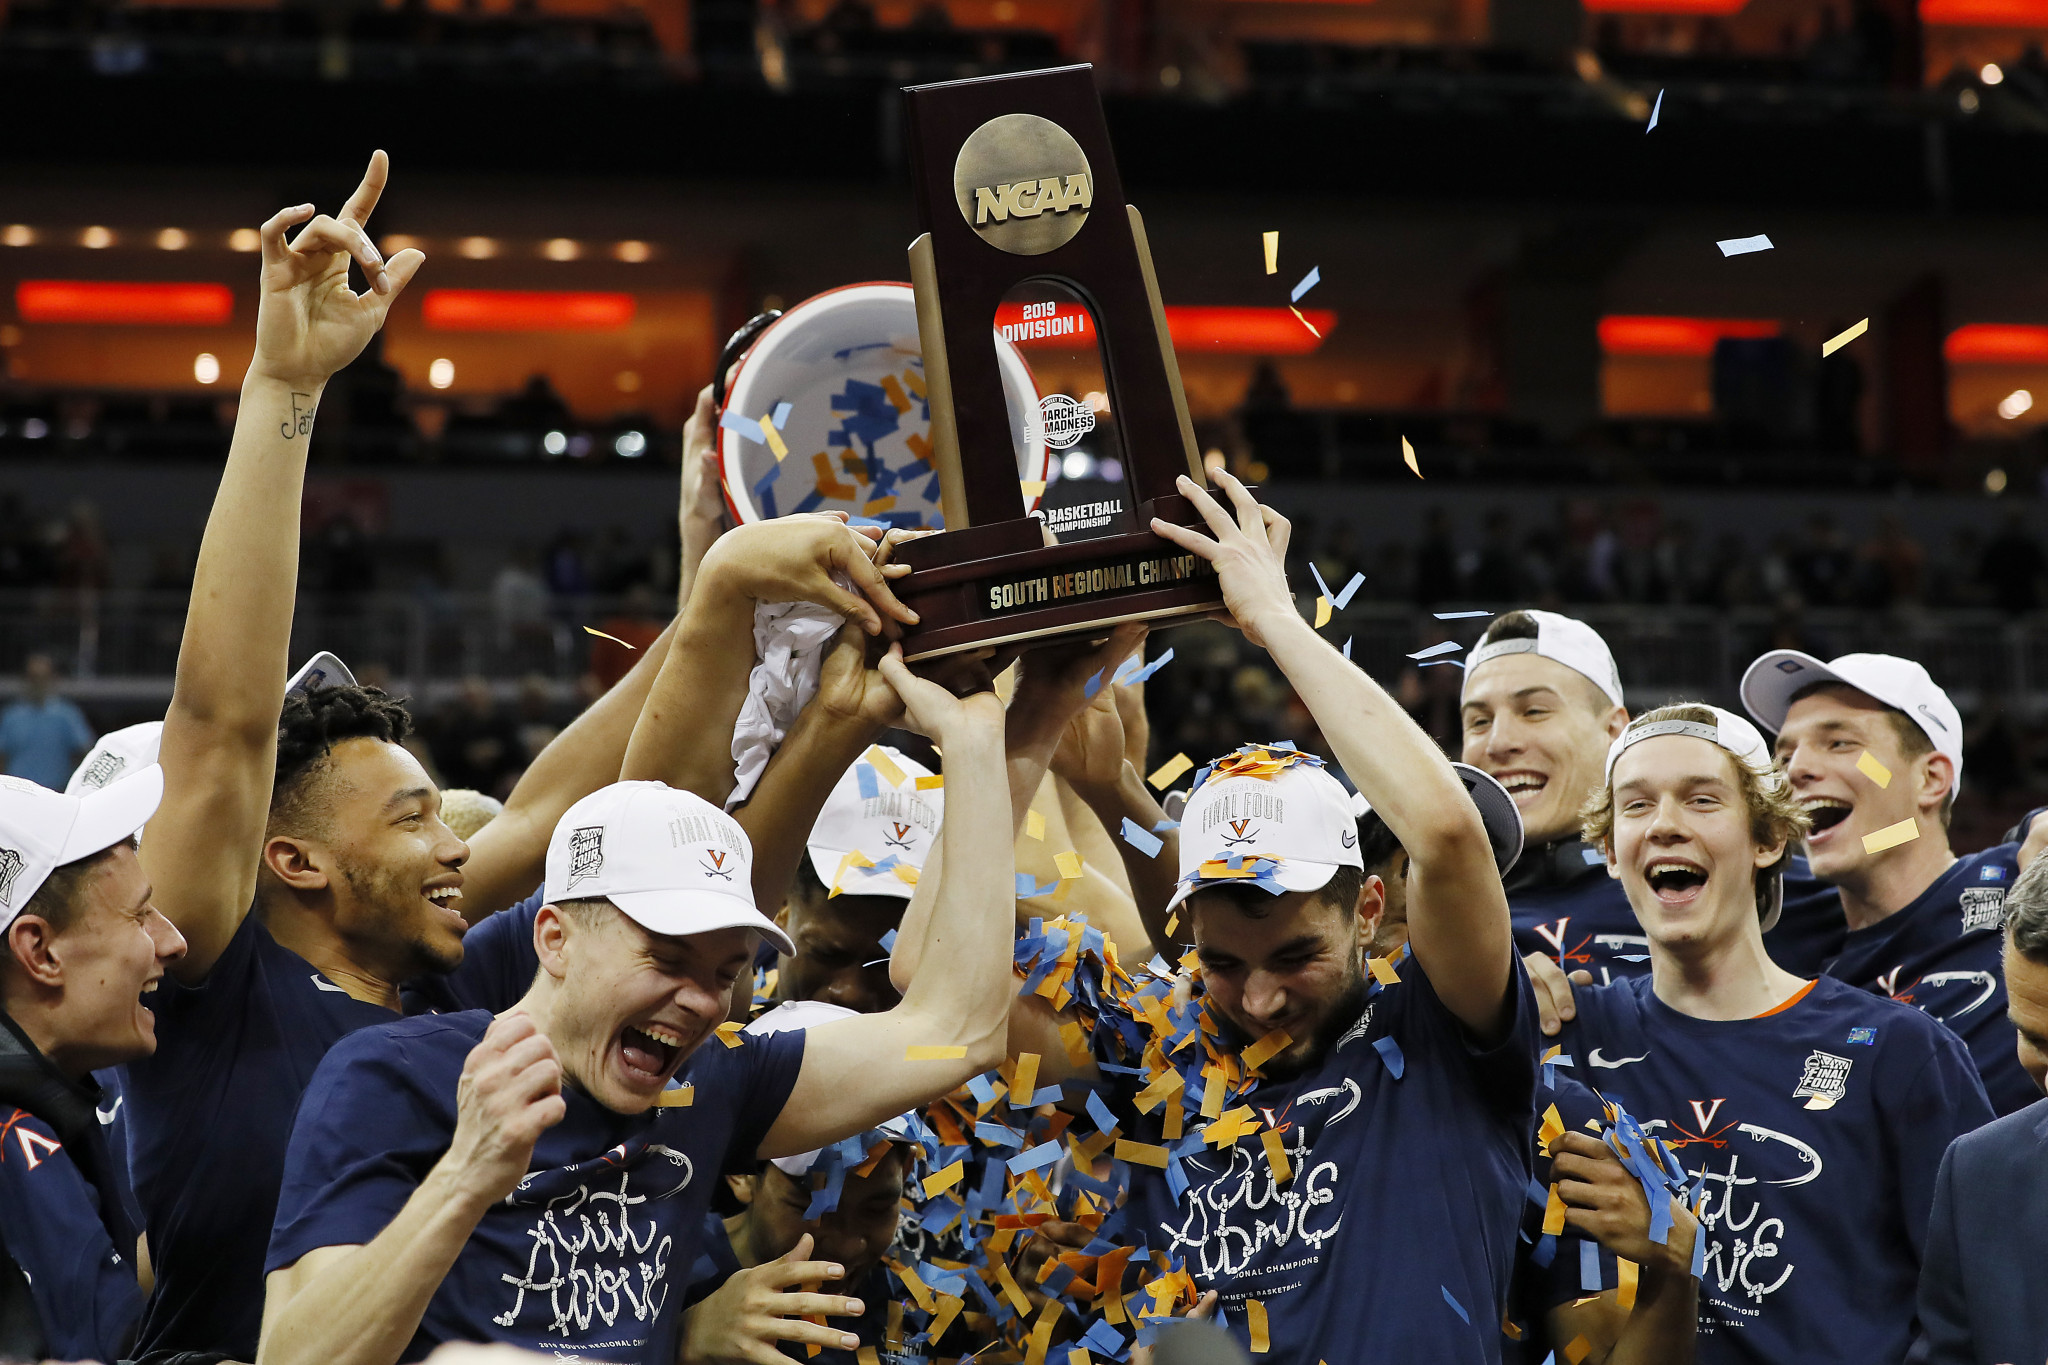 Defending champions Virginia face missing March Madness due to COVID-19 case